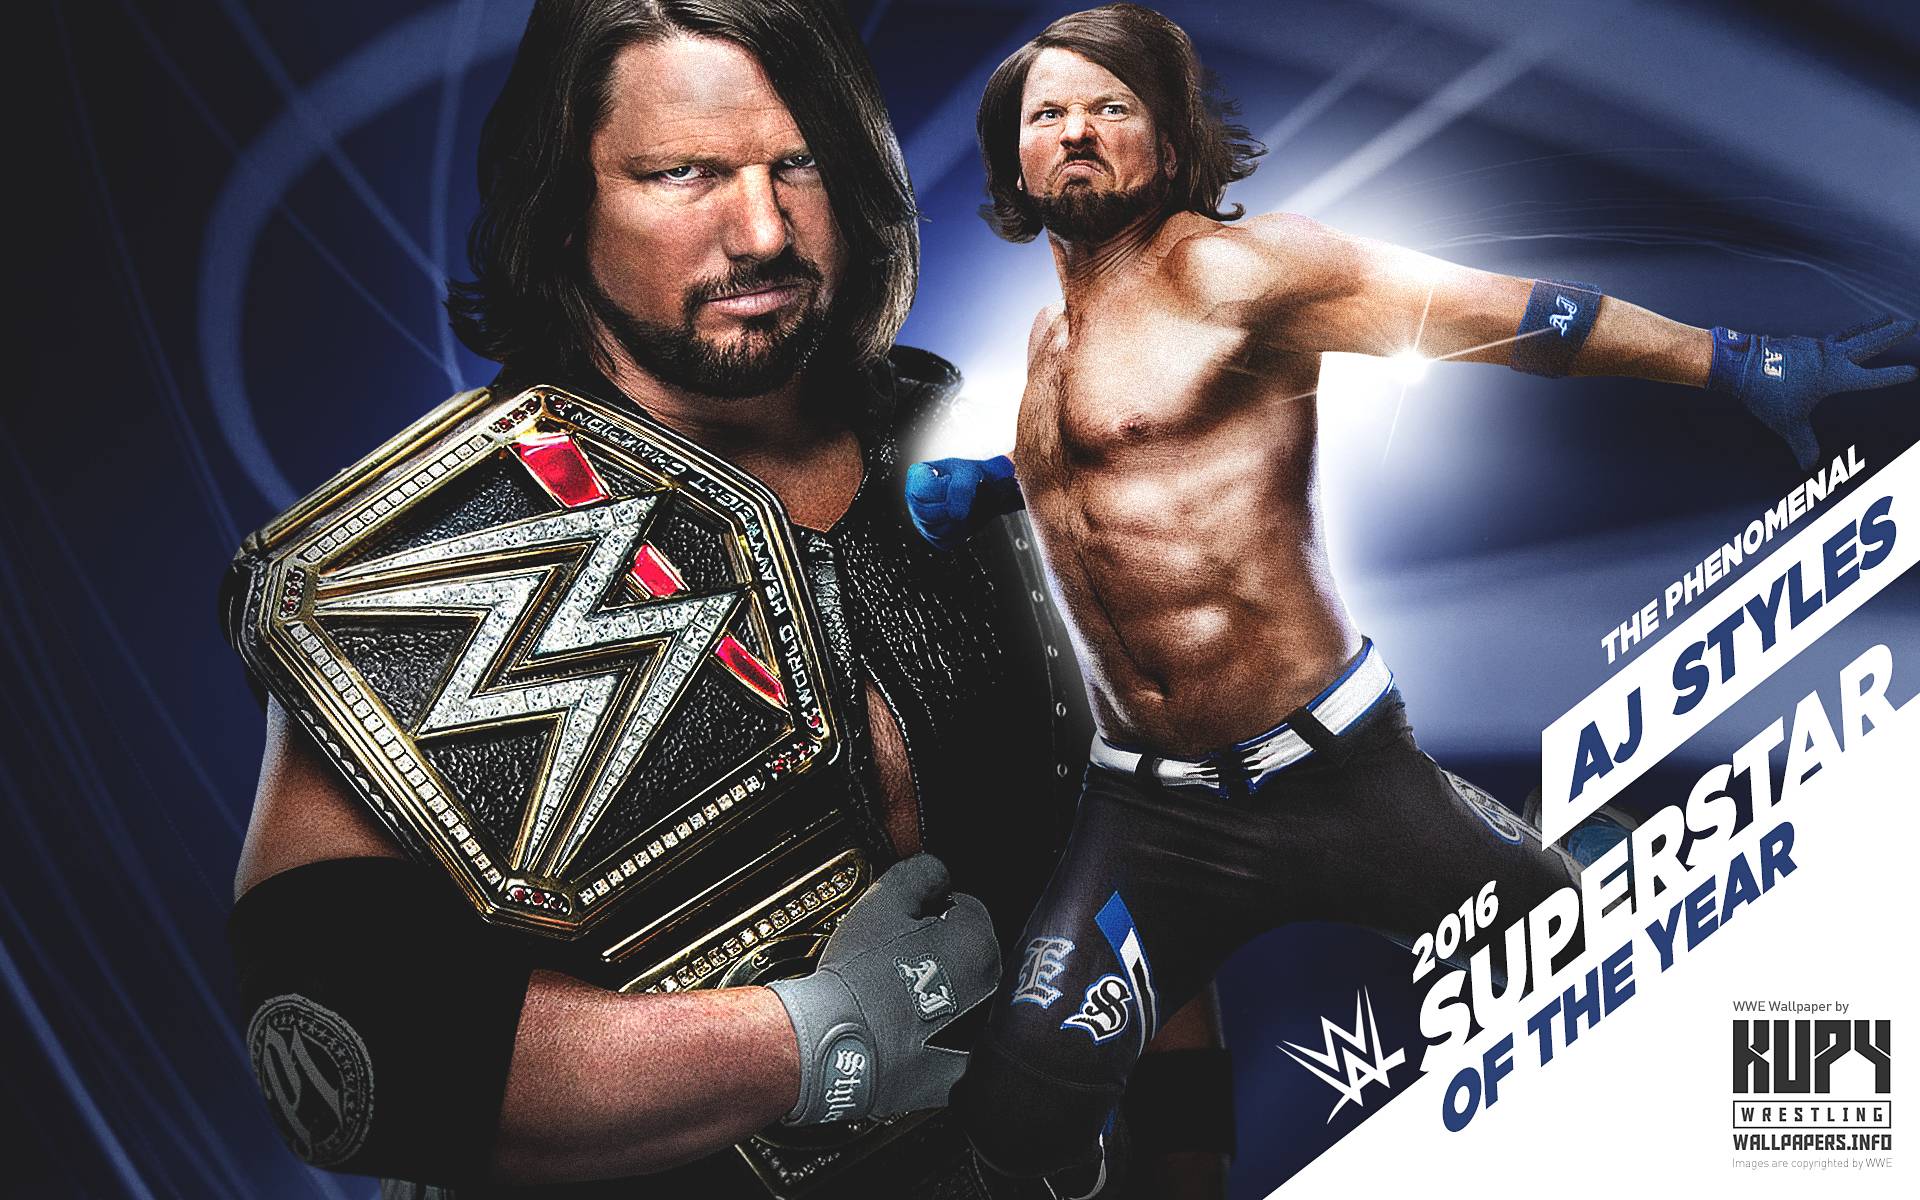 NEW AJ Styles 2016 WWE Superstar of the Year wallpaper!